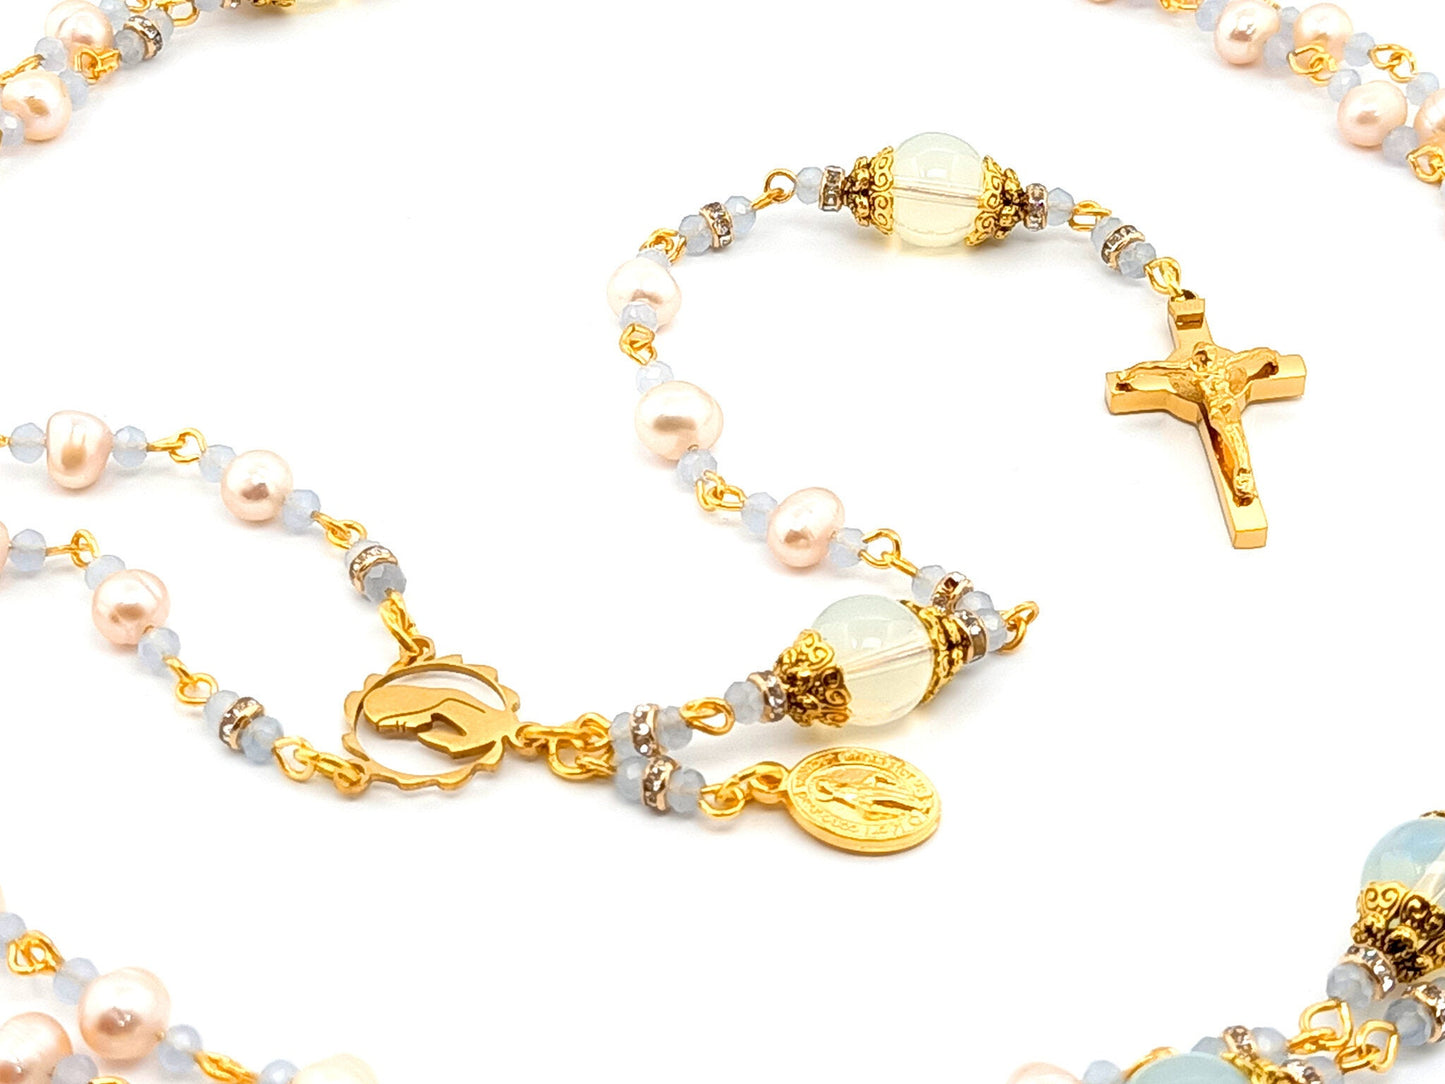 Virgin Mary unique rosary beads freshwater pearls and opal gemstone rosary beads with gold plated stainless steel Saint Benedict crucifix.